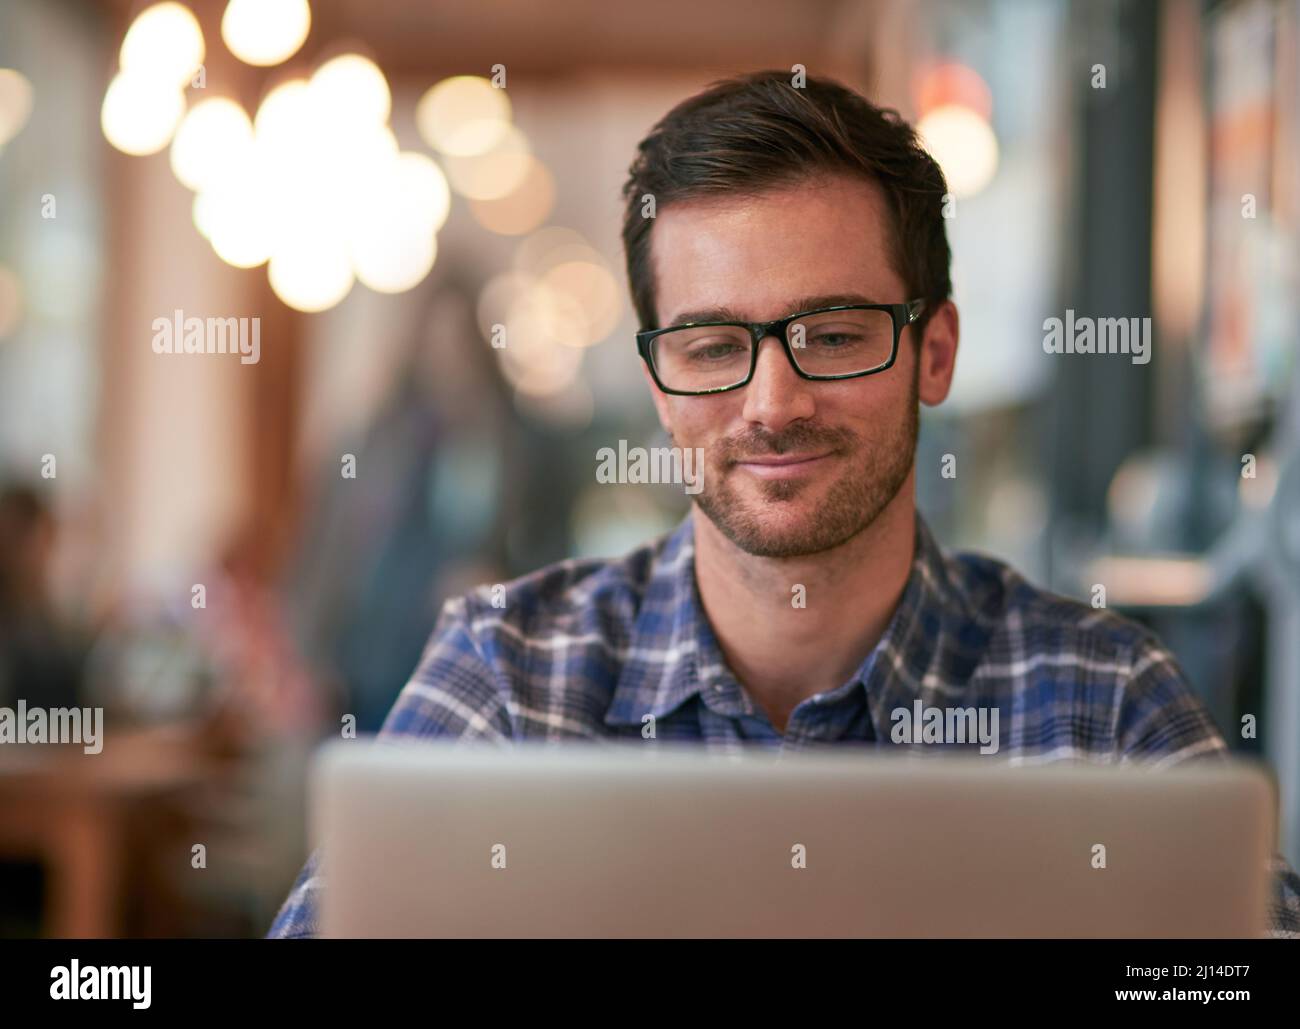 The free wifi here makes it a no brainer. Shot of a young man using his laptop while sitting in a coffee shop. Stock Photo